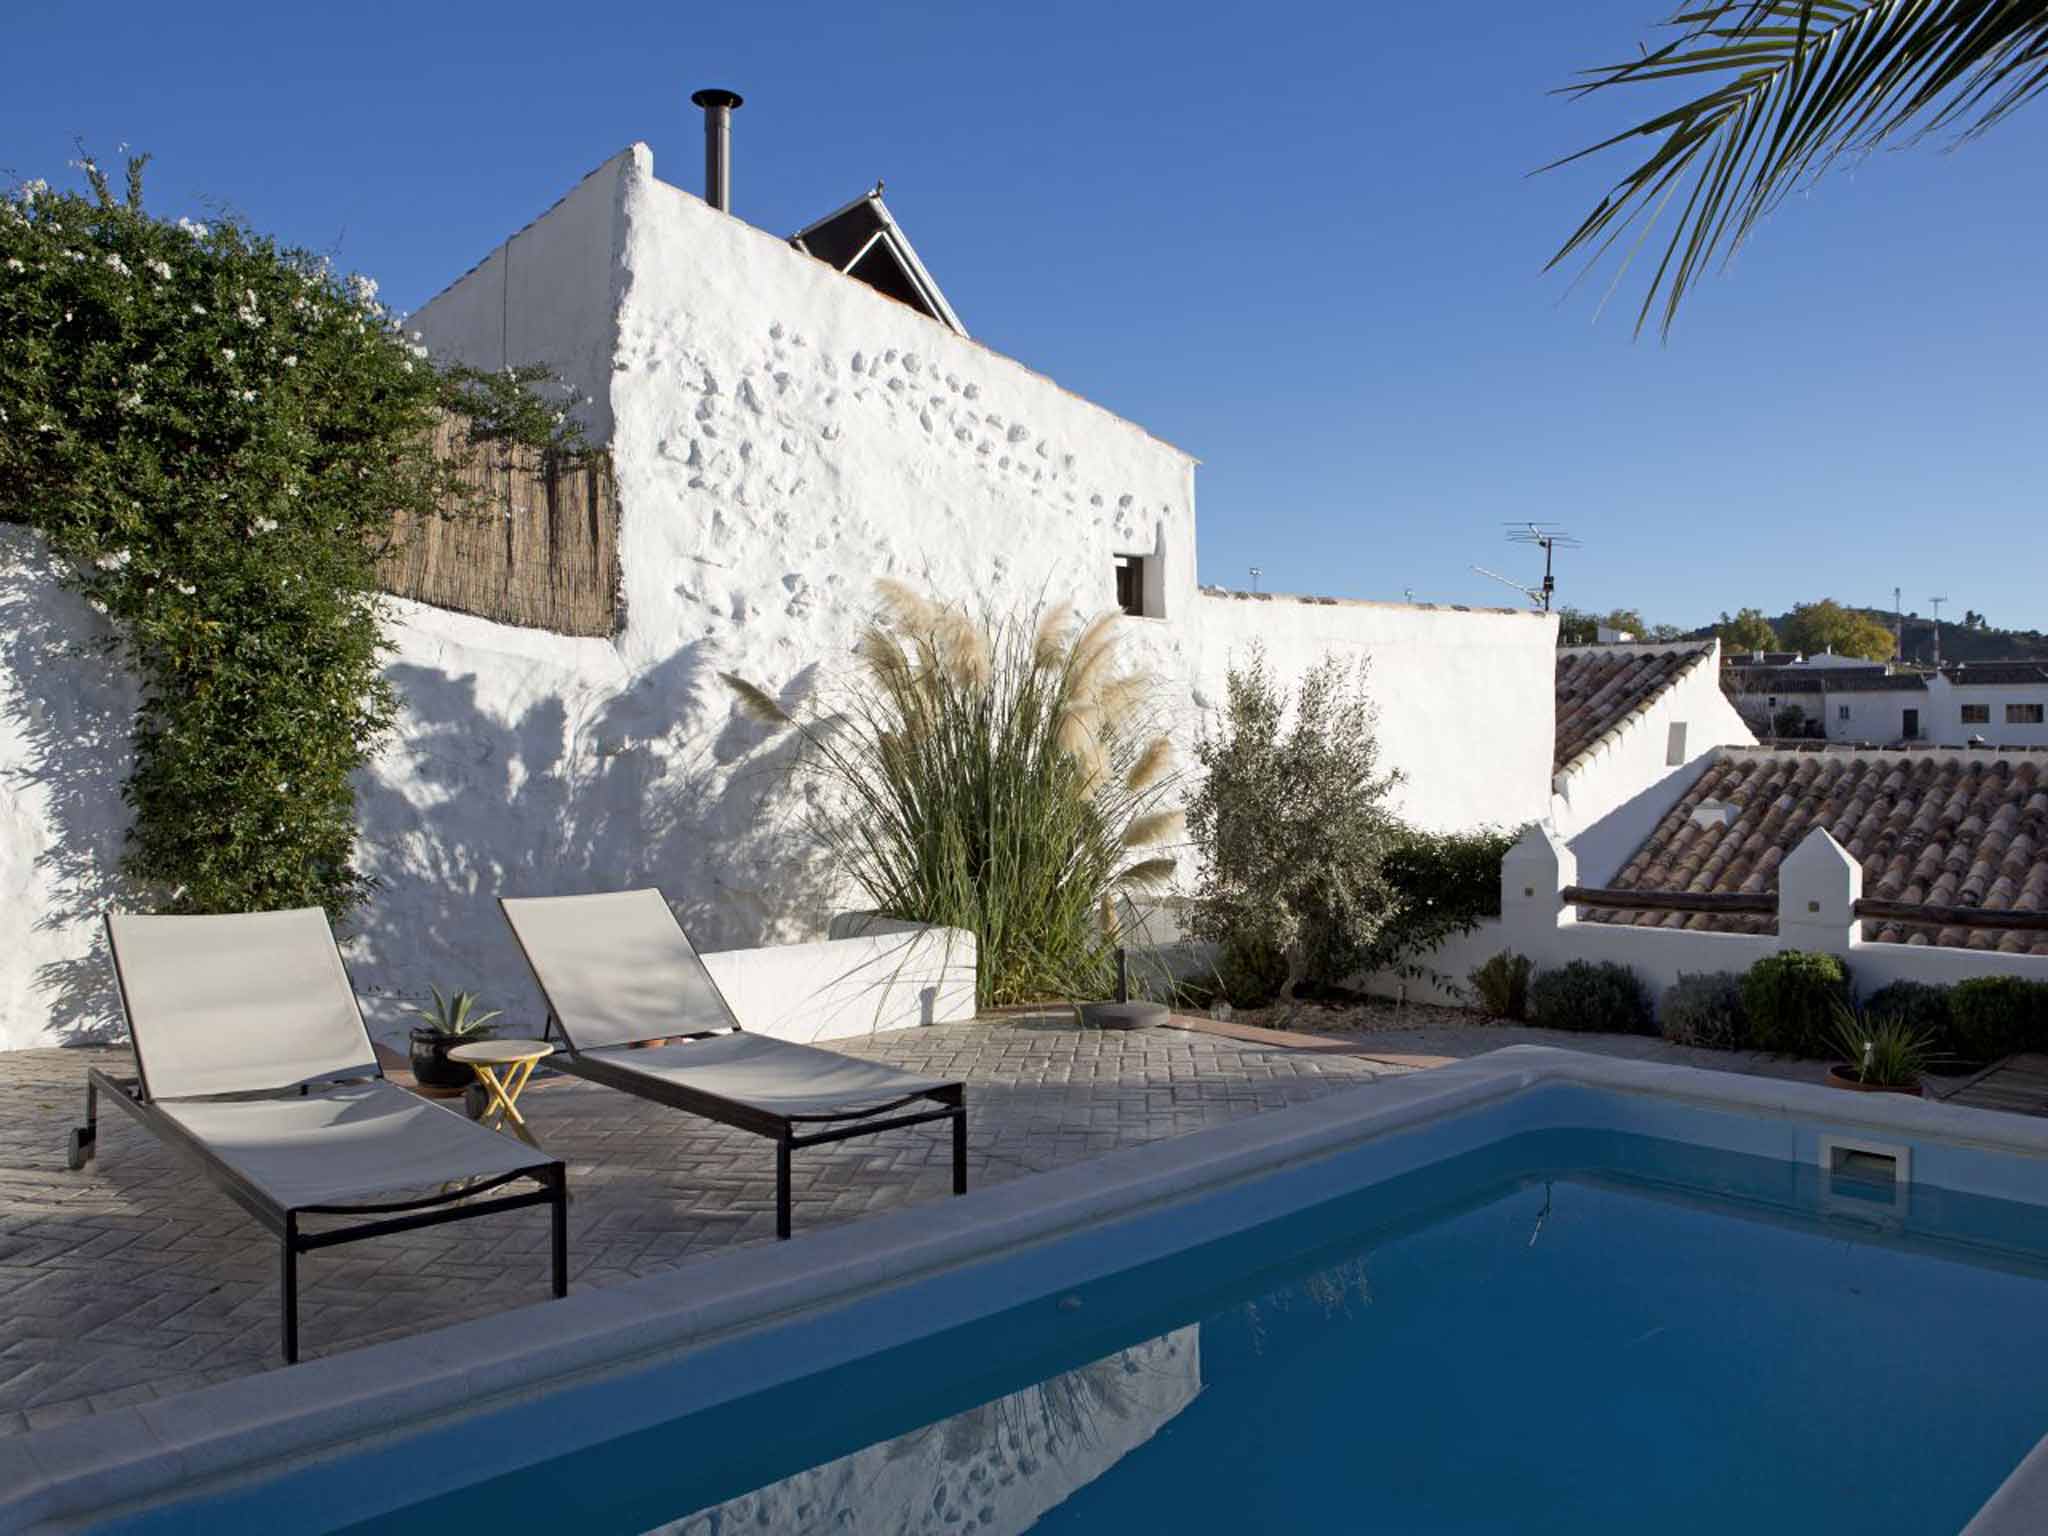 The pool and whitewashed exterior